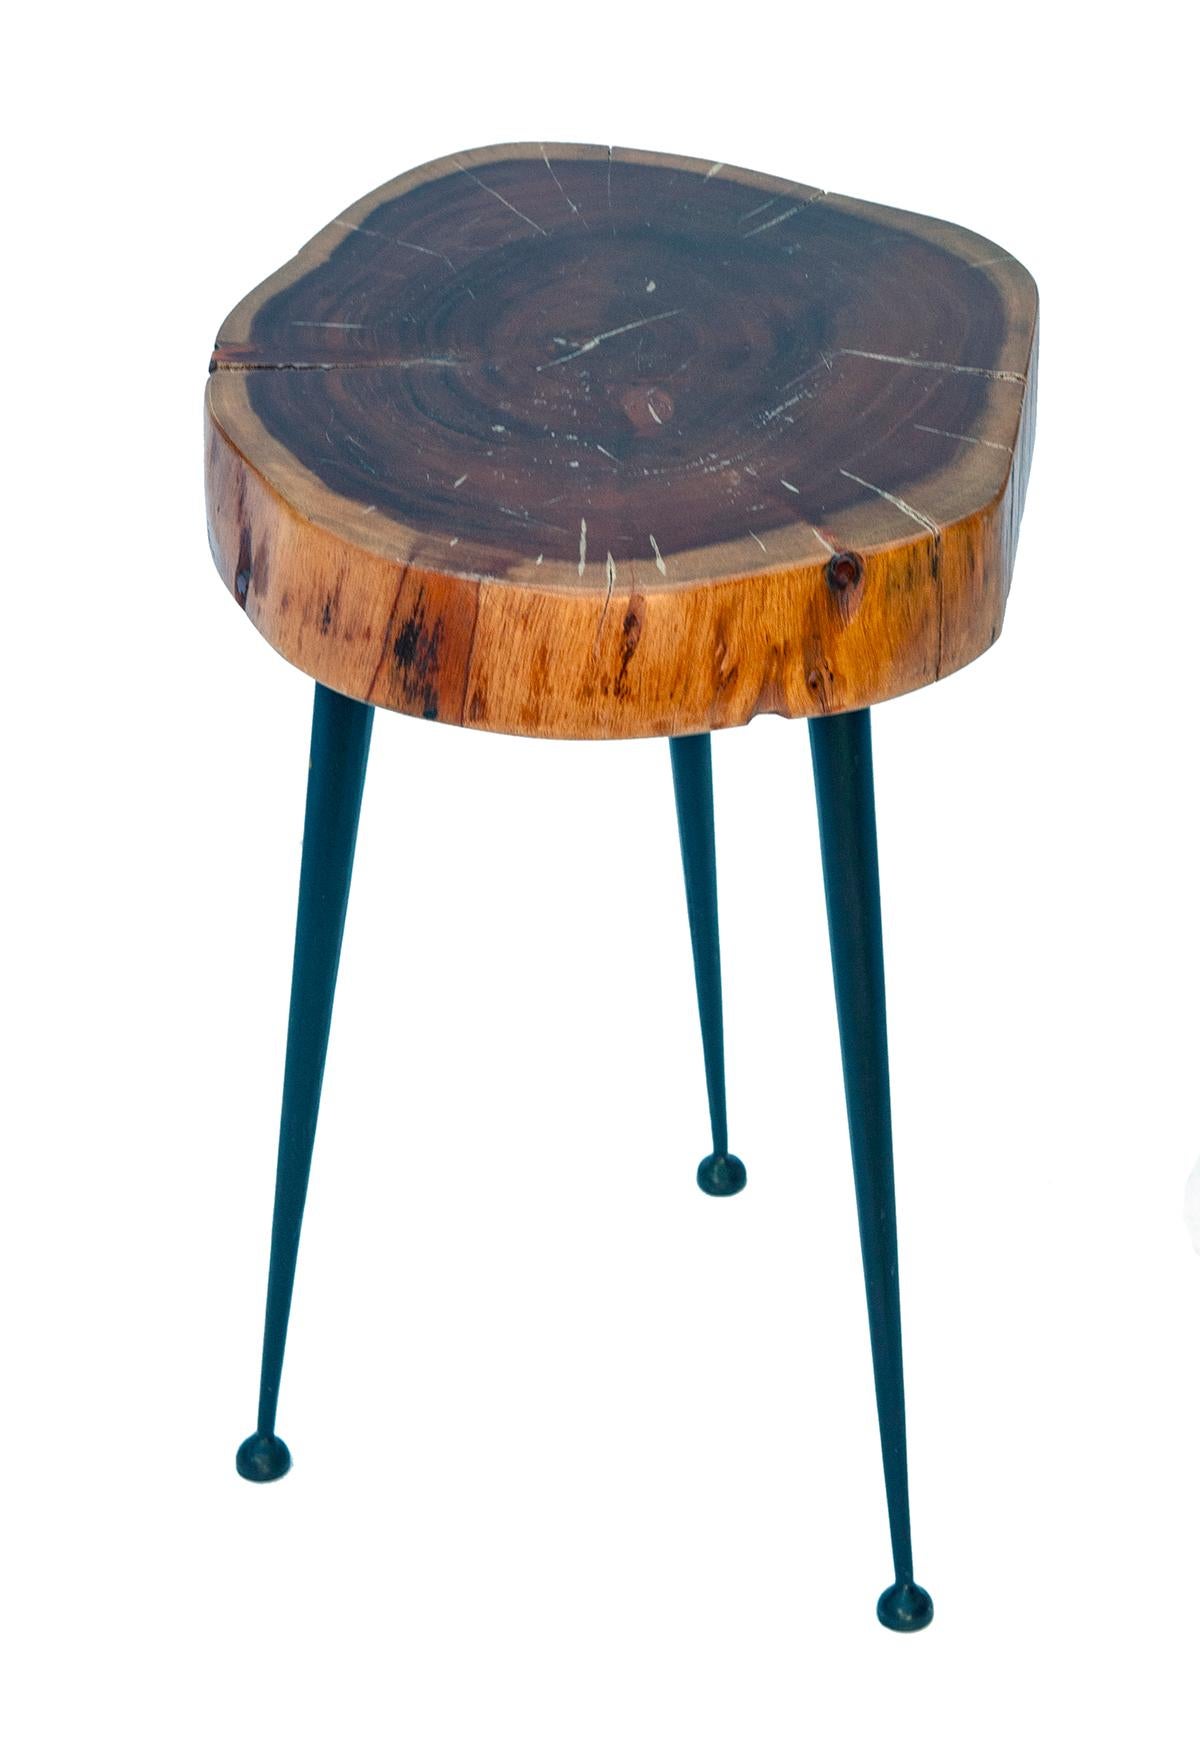 Organic Modern Atomic Age Industrial 3 Legged Table/ Rustic Wood Top  For Sale